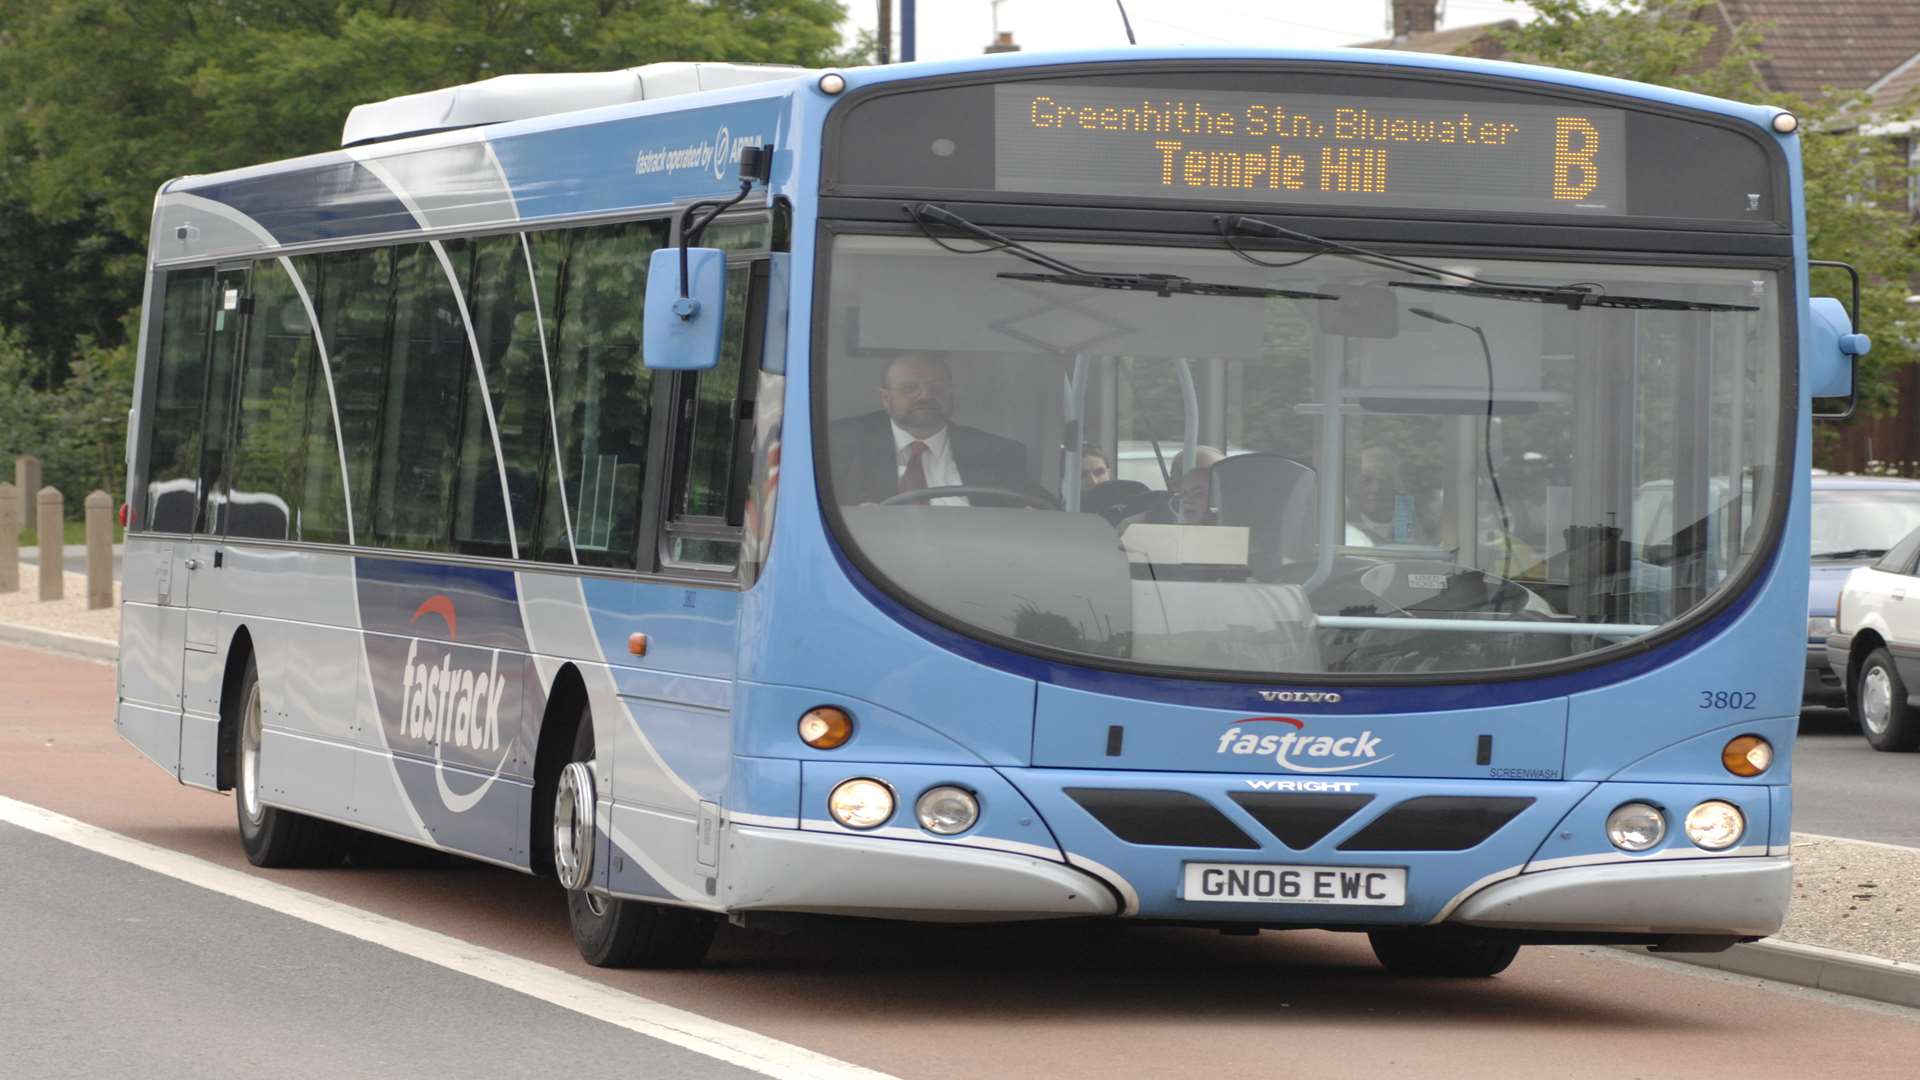 It is a believed a fastrack bus, similar to this one, has been involved in a collision with a car